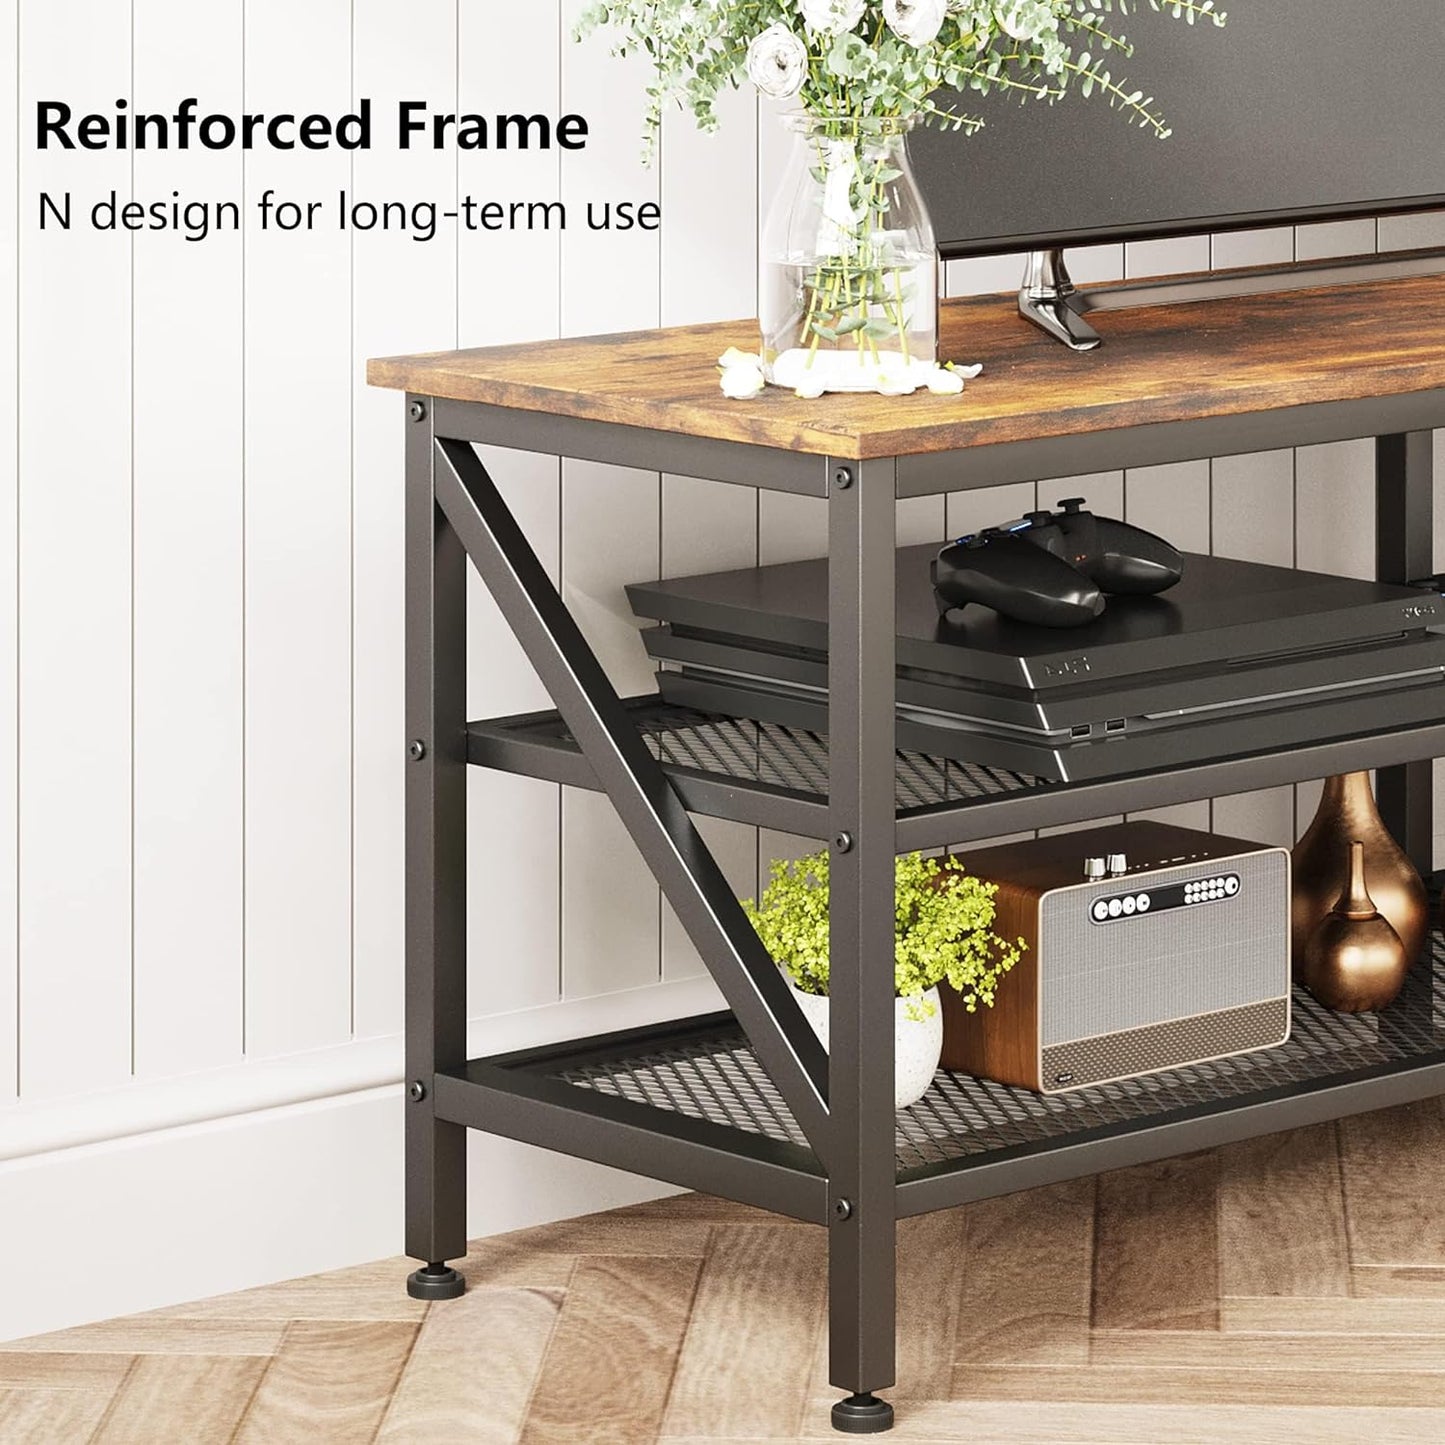 SKY-TOUCH TV Stand : Modern TV Table Wide TV Entertainment Center with Storage Shelves Sturdy Wooden TV Console Table with Metal Frame for Living Room (160 * 40 * 50CM Tiger Wood)